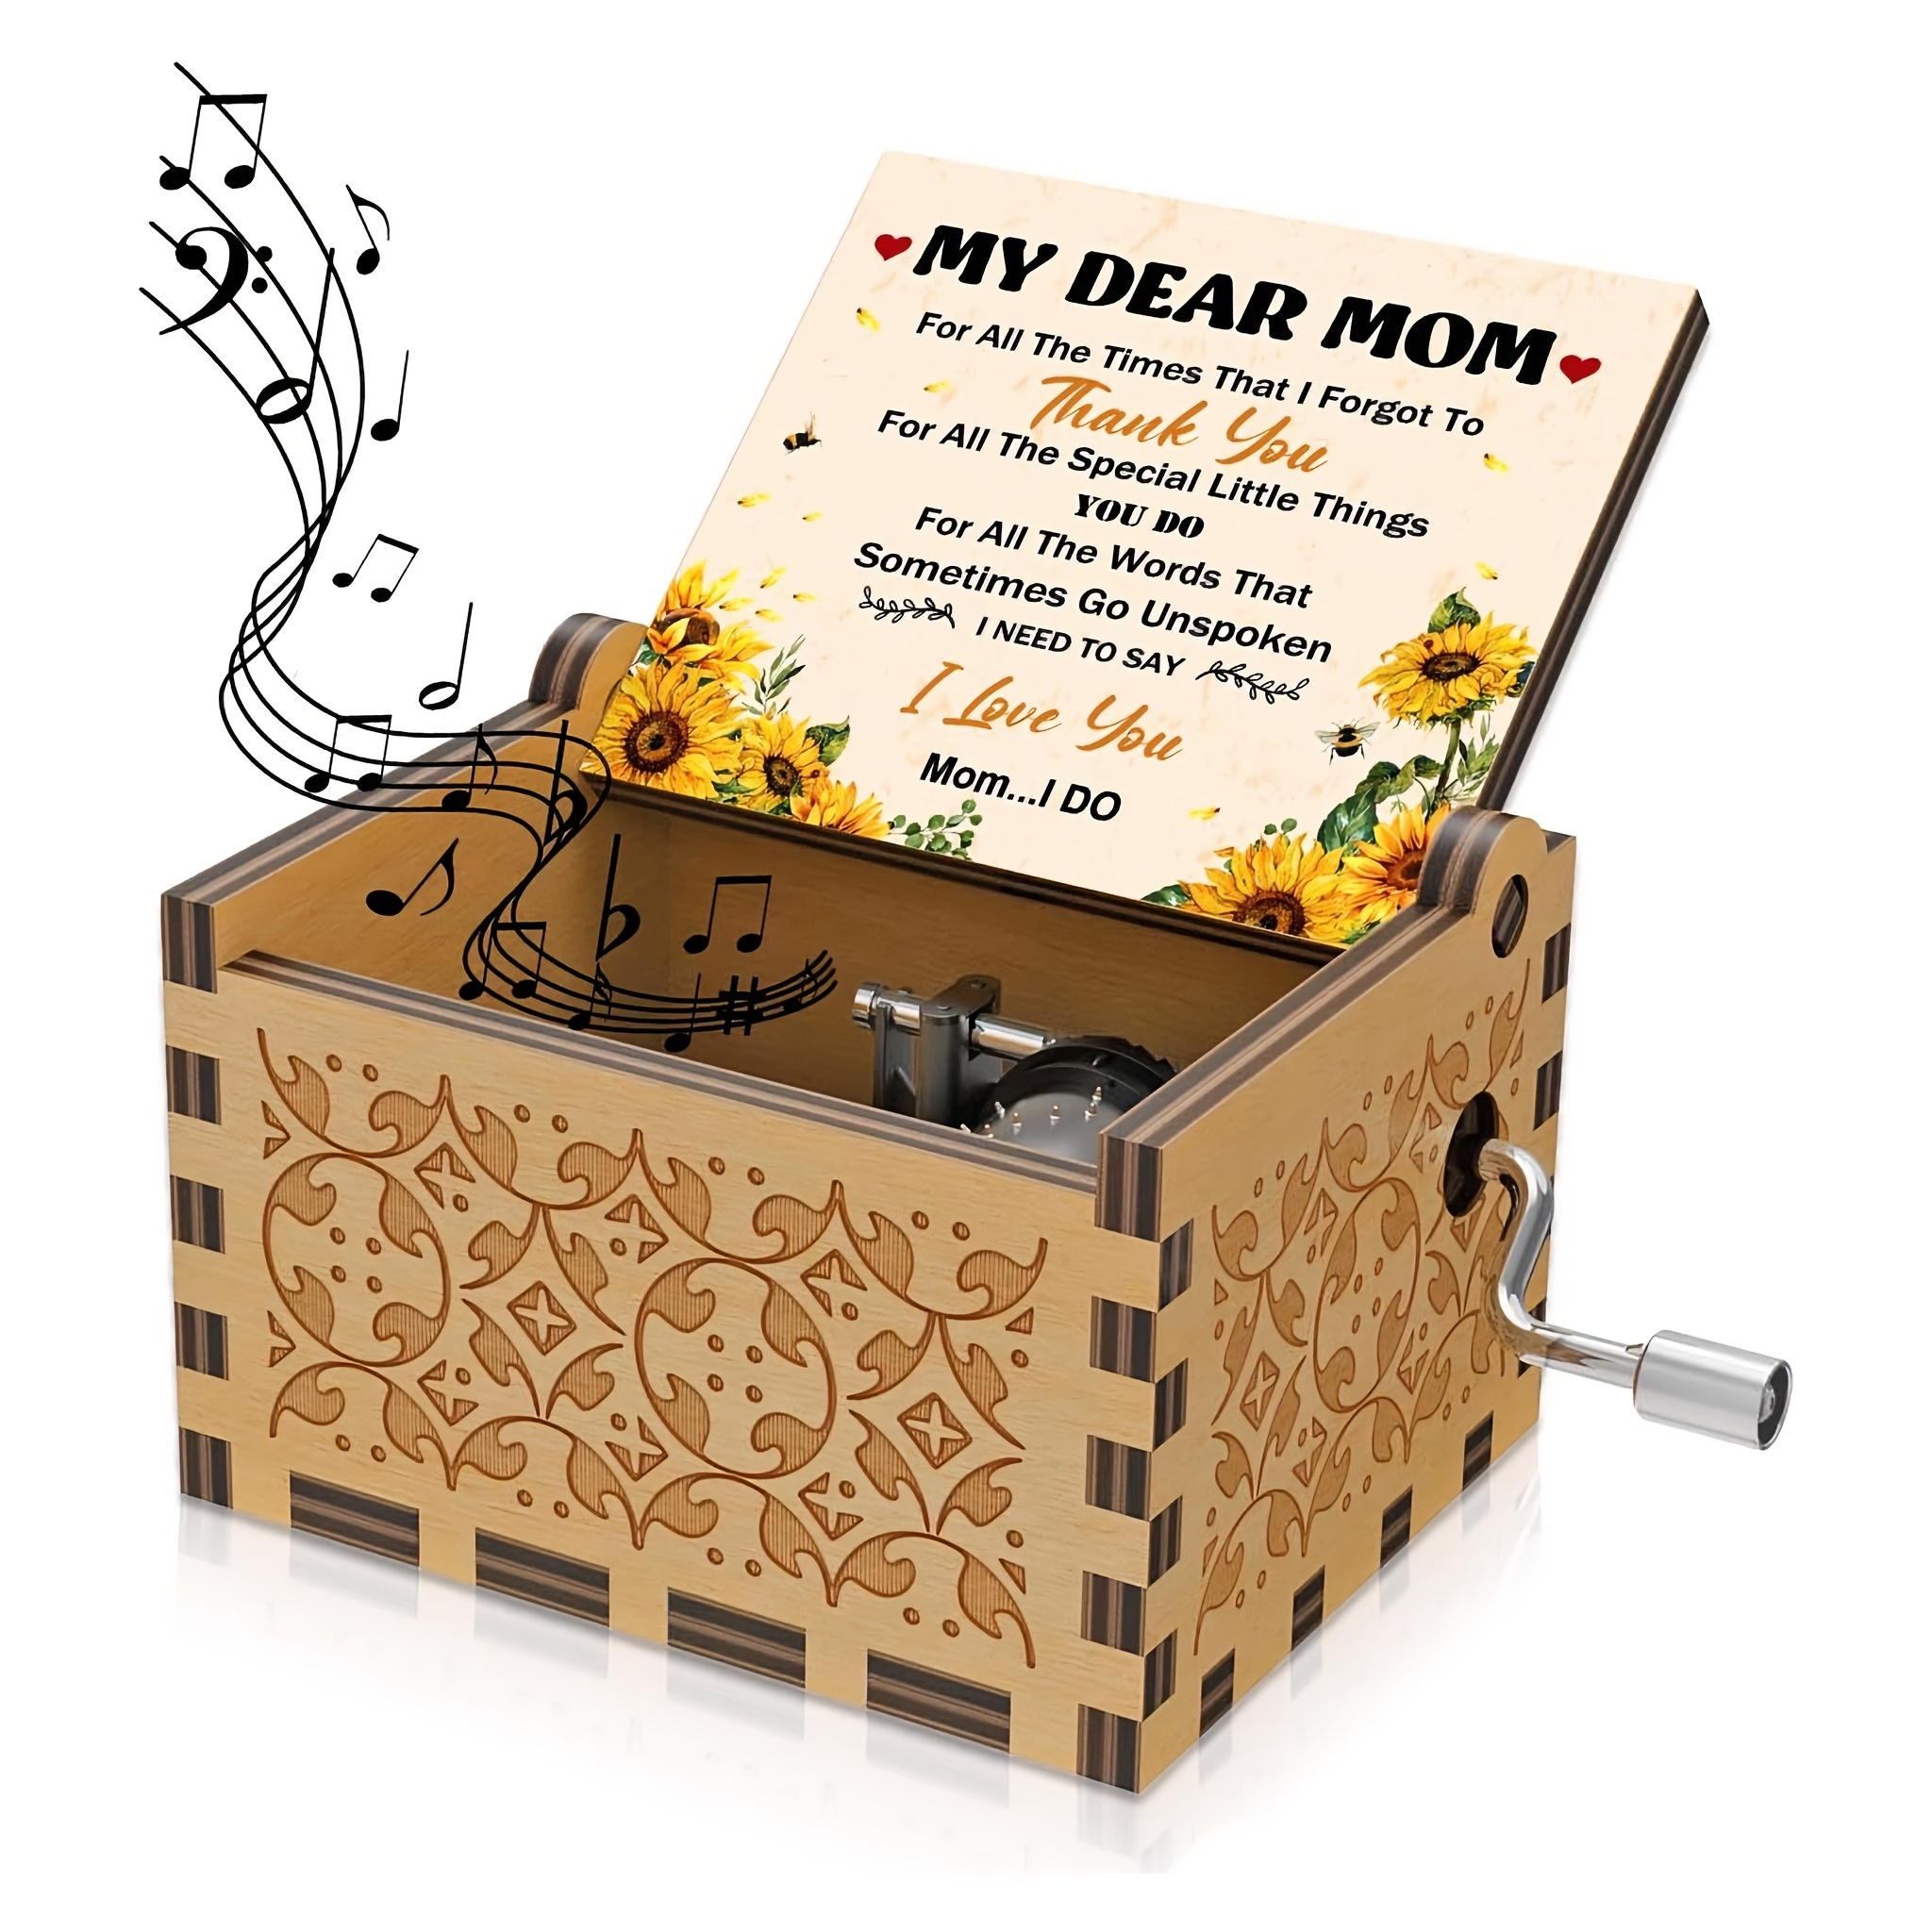 Likeny birthday gifts for mom wooden musical box gifts for mom from  daughter son womens gifts